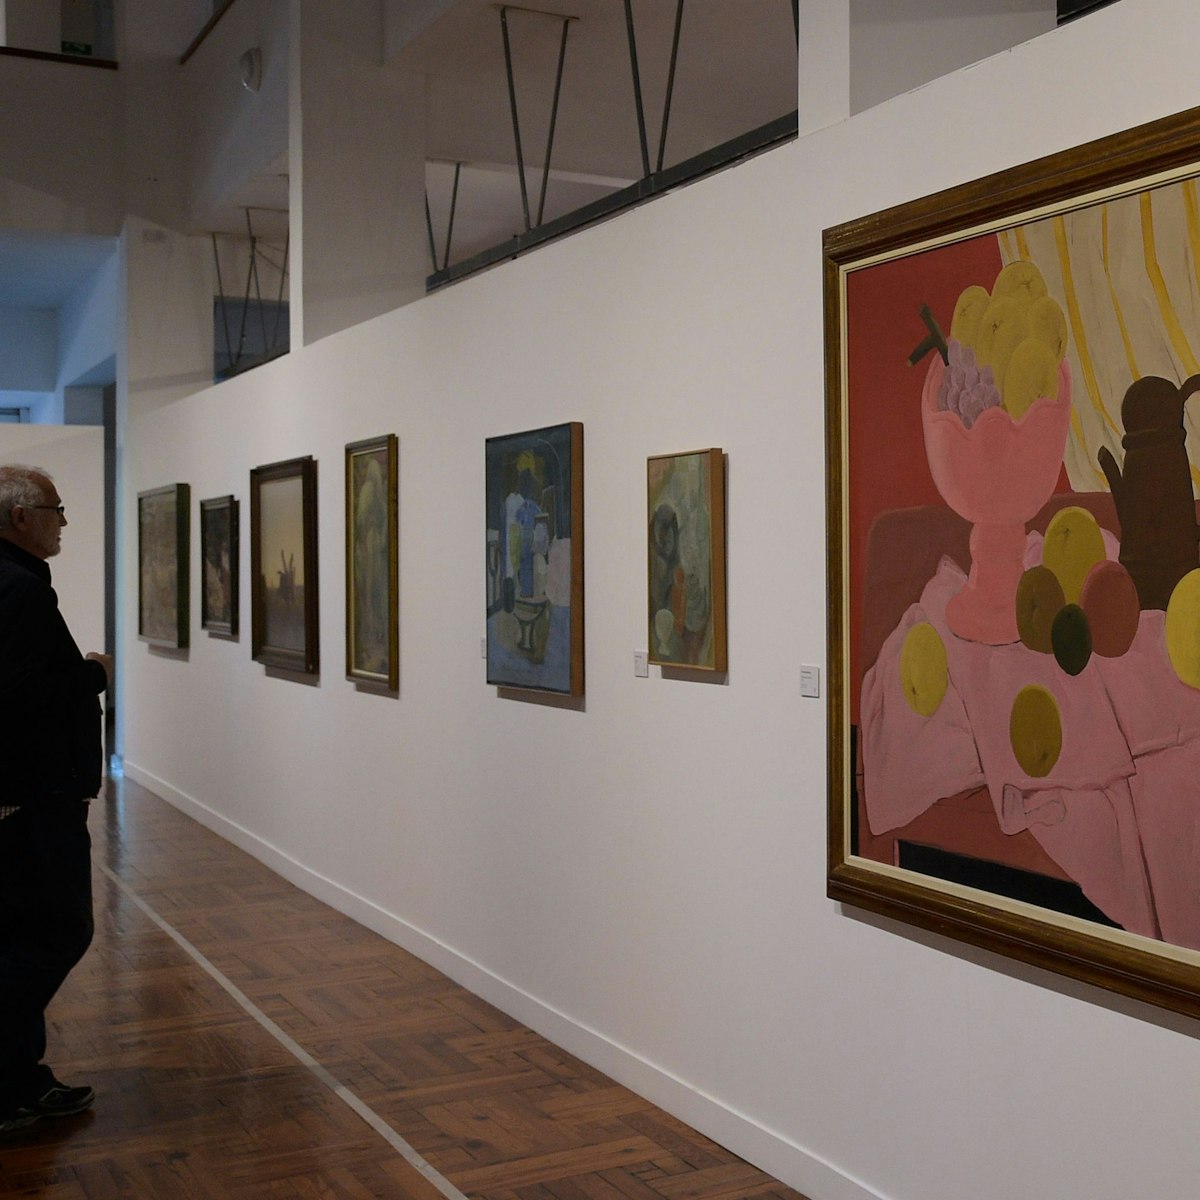 A visitor looks at a painting by Colombian artist Fernando Botero during an exhibition of painters from Uruguay, Mexico and Colombia at the Museum of Visual Arts in Montevideo on March 22, 2018. / AFP PHOTO / Miguel ROJO        (Photo credit should read MIGUEL ROJO/AFP/Getty Images)